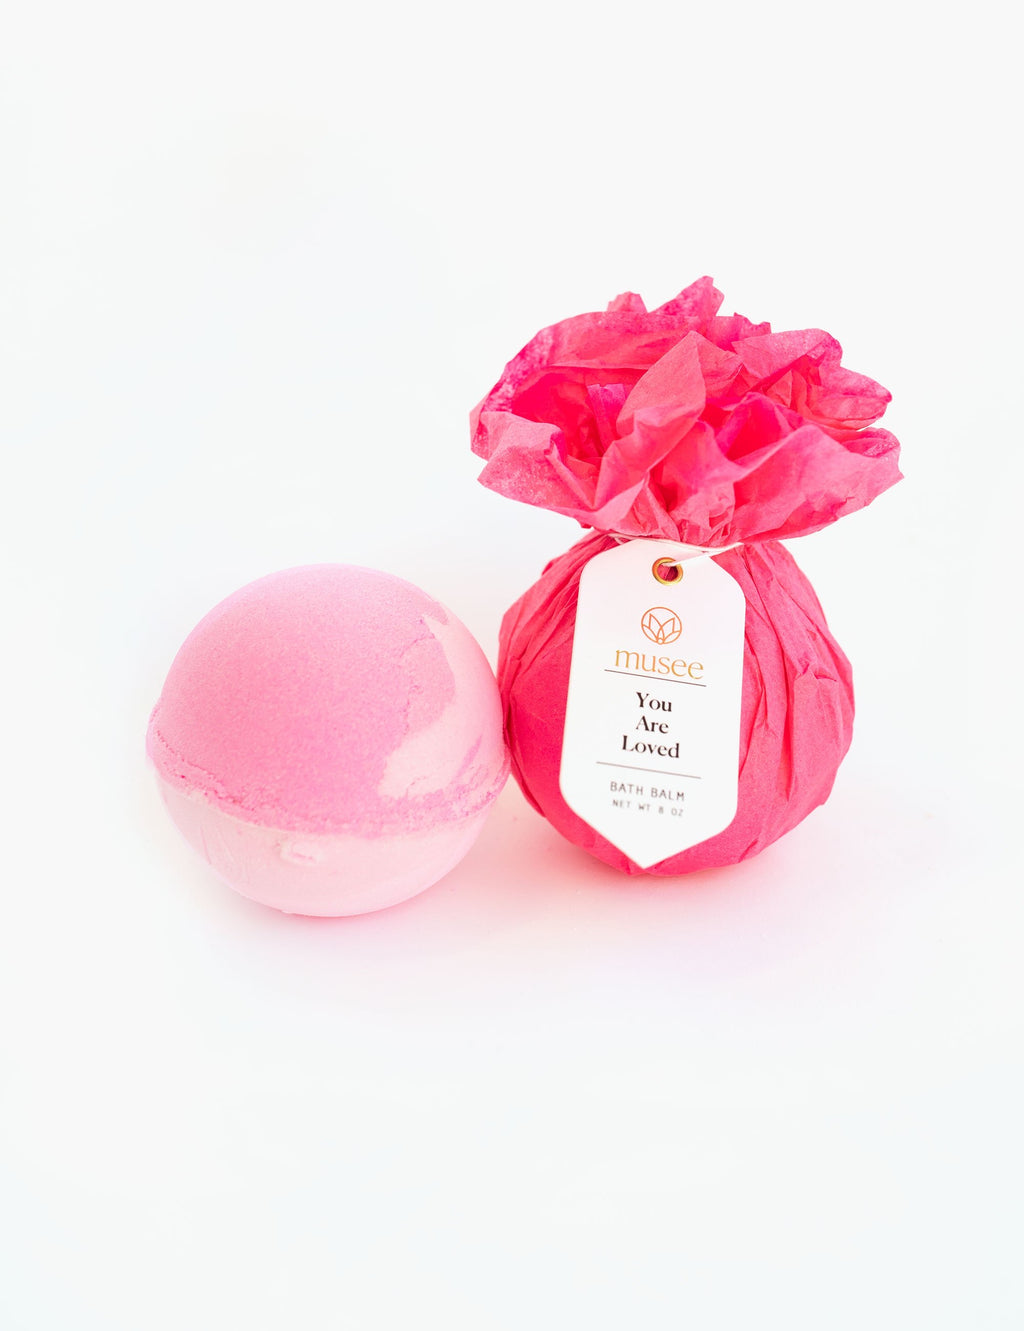 Musee Bath Bomb - You Are Loved - Monogram Market